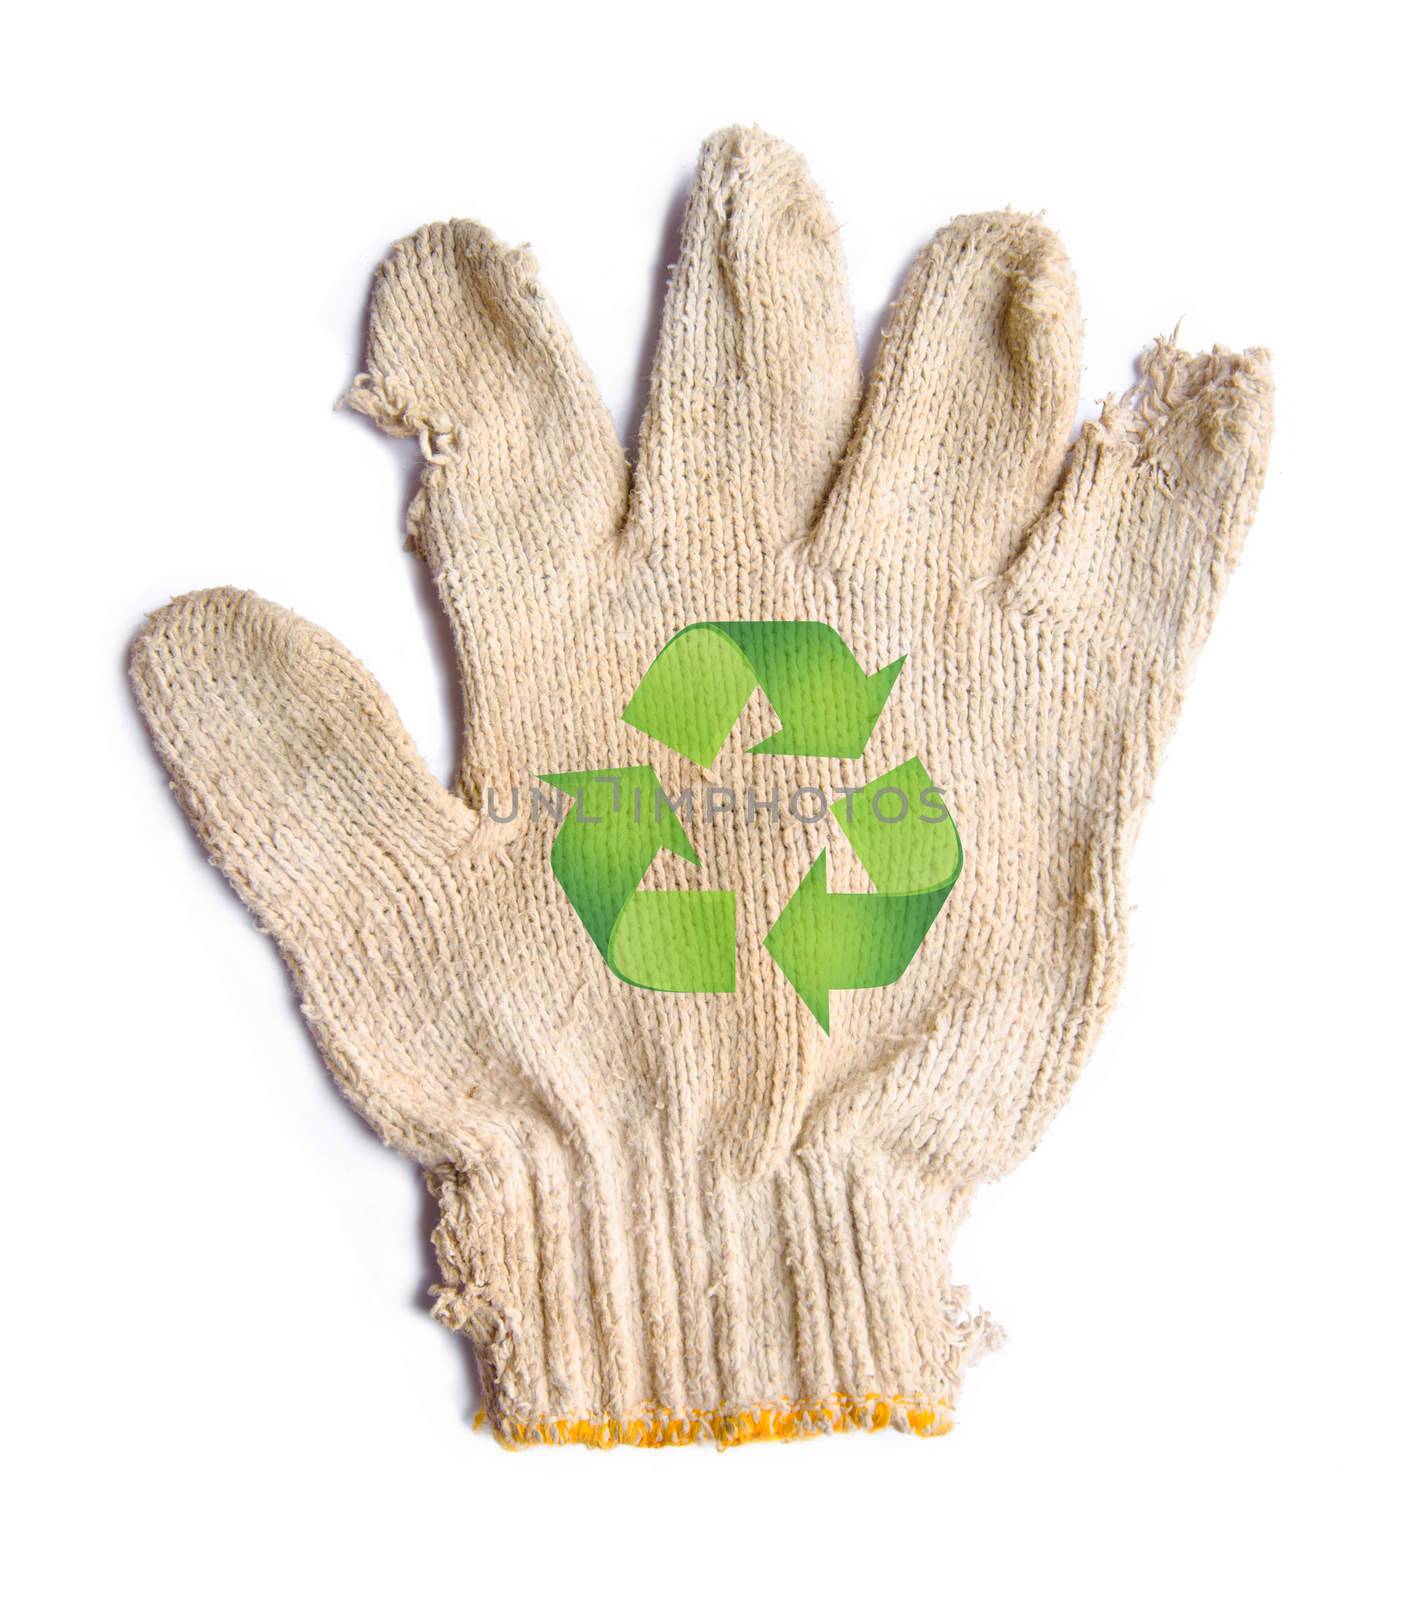 lack gloves fabric garbage with recycle recycle sign isolated on white background, eco recycle garbage concept